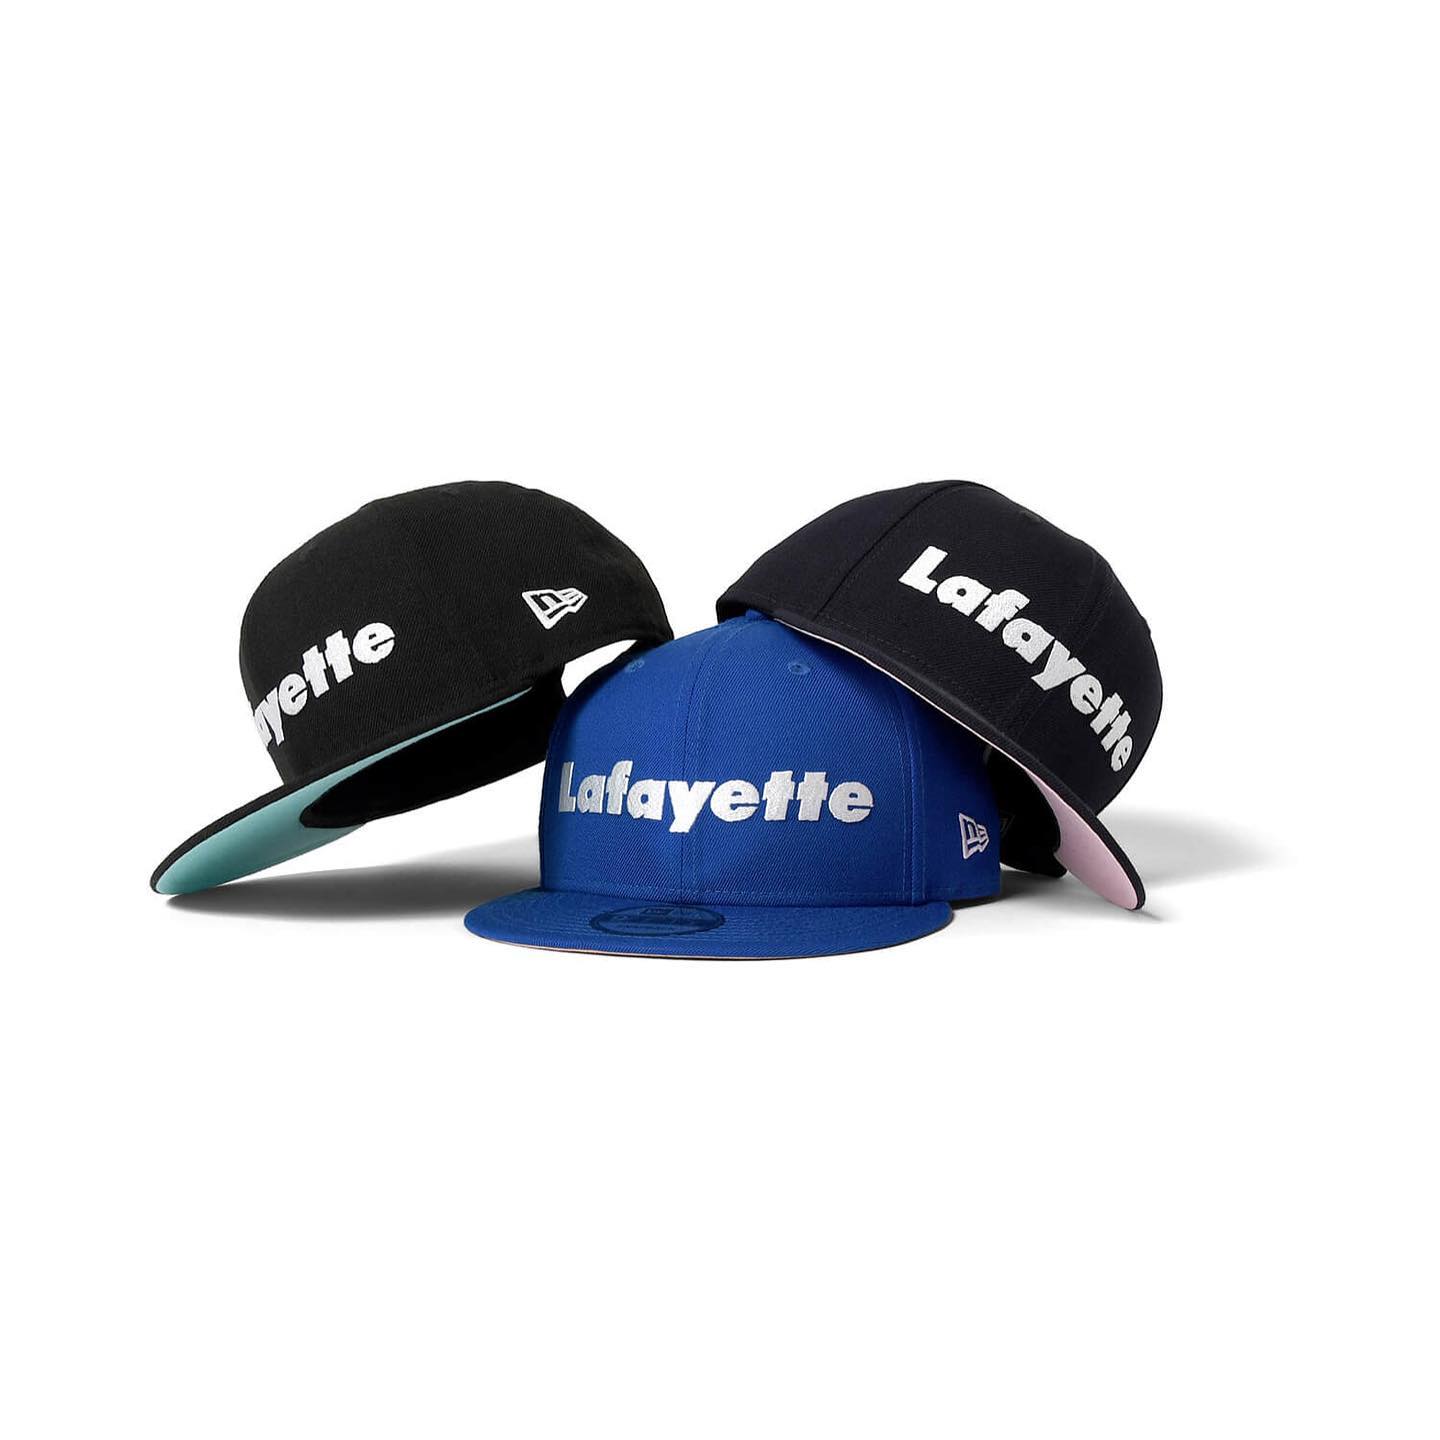 Limited LFYT x New Era Lafayette 9Fifty Snapback available in